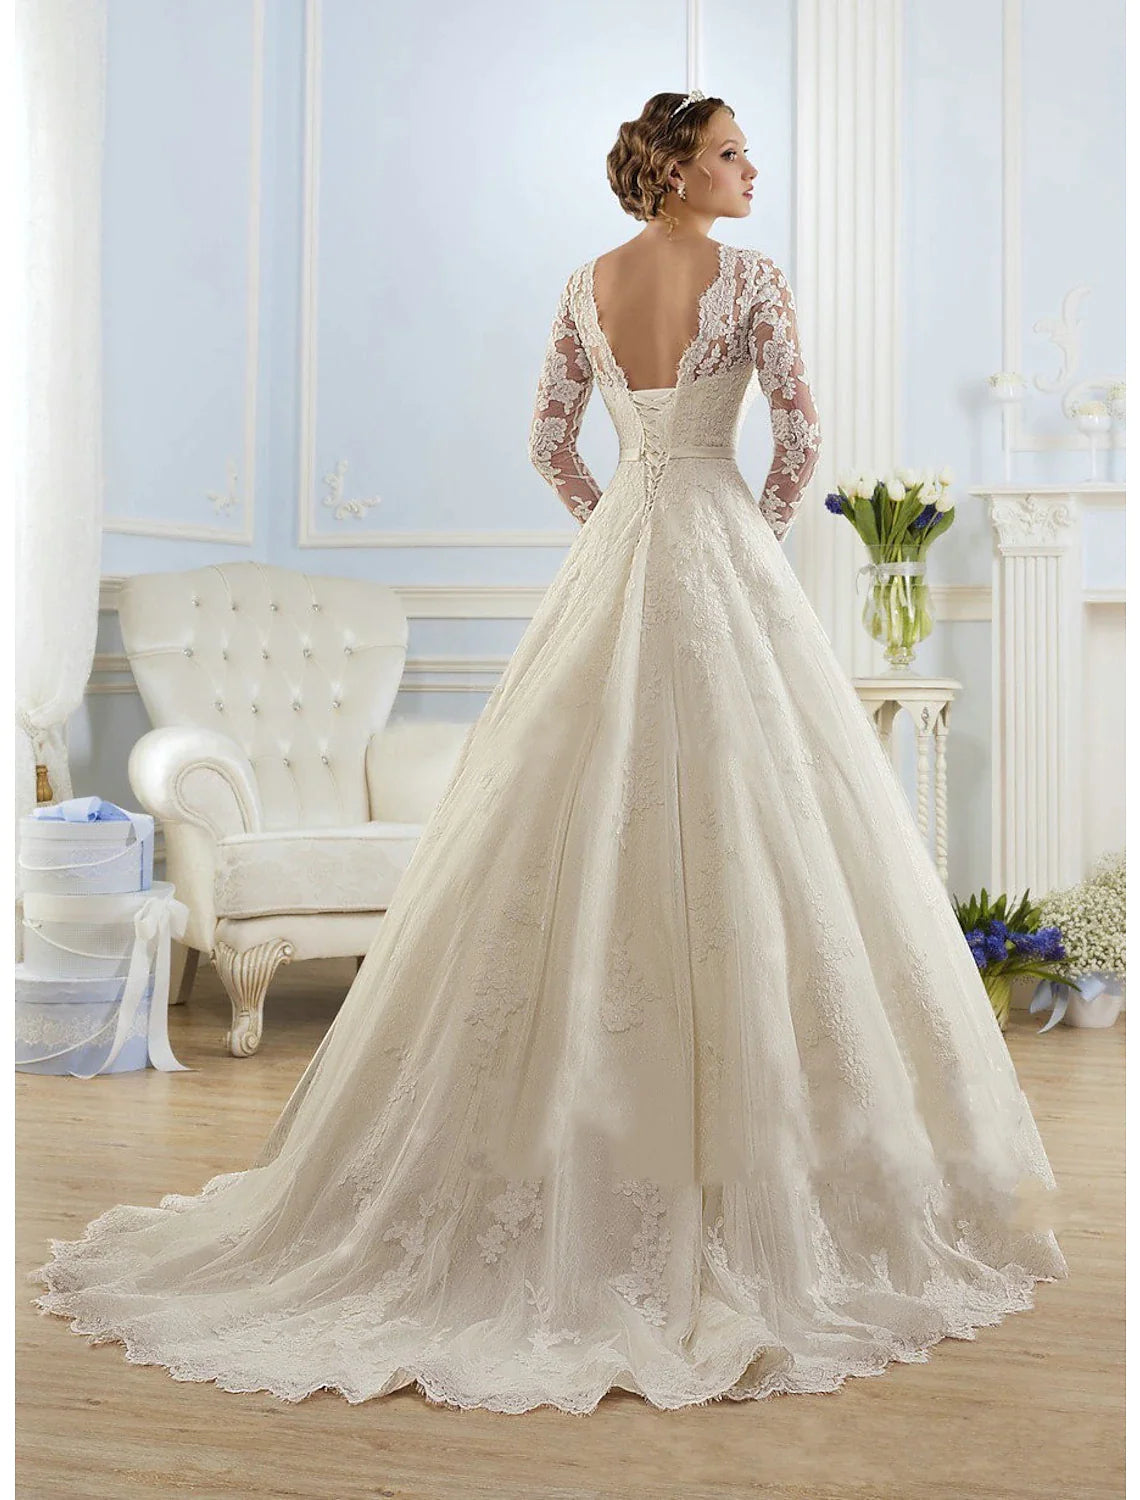 Engagement Formal Fall Wedding Dresses Ball Gown Illusion Neck Long Sleeve Court Train Lace Bridal Gowns With Appliques